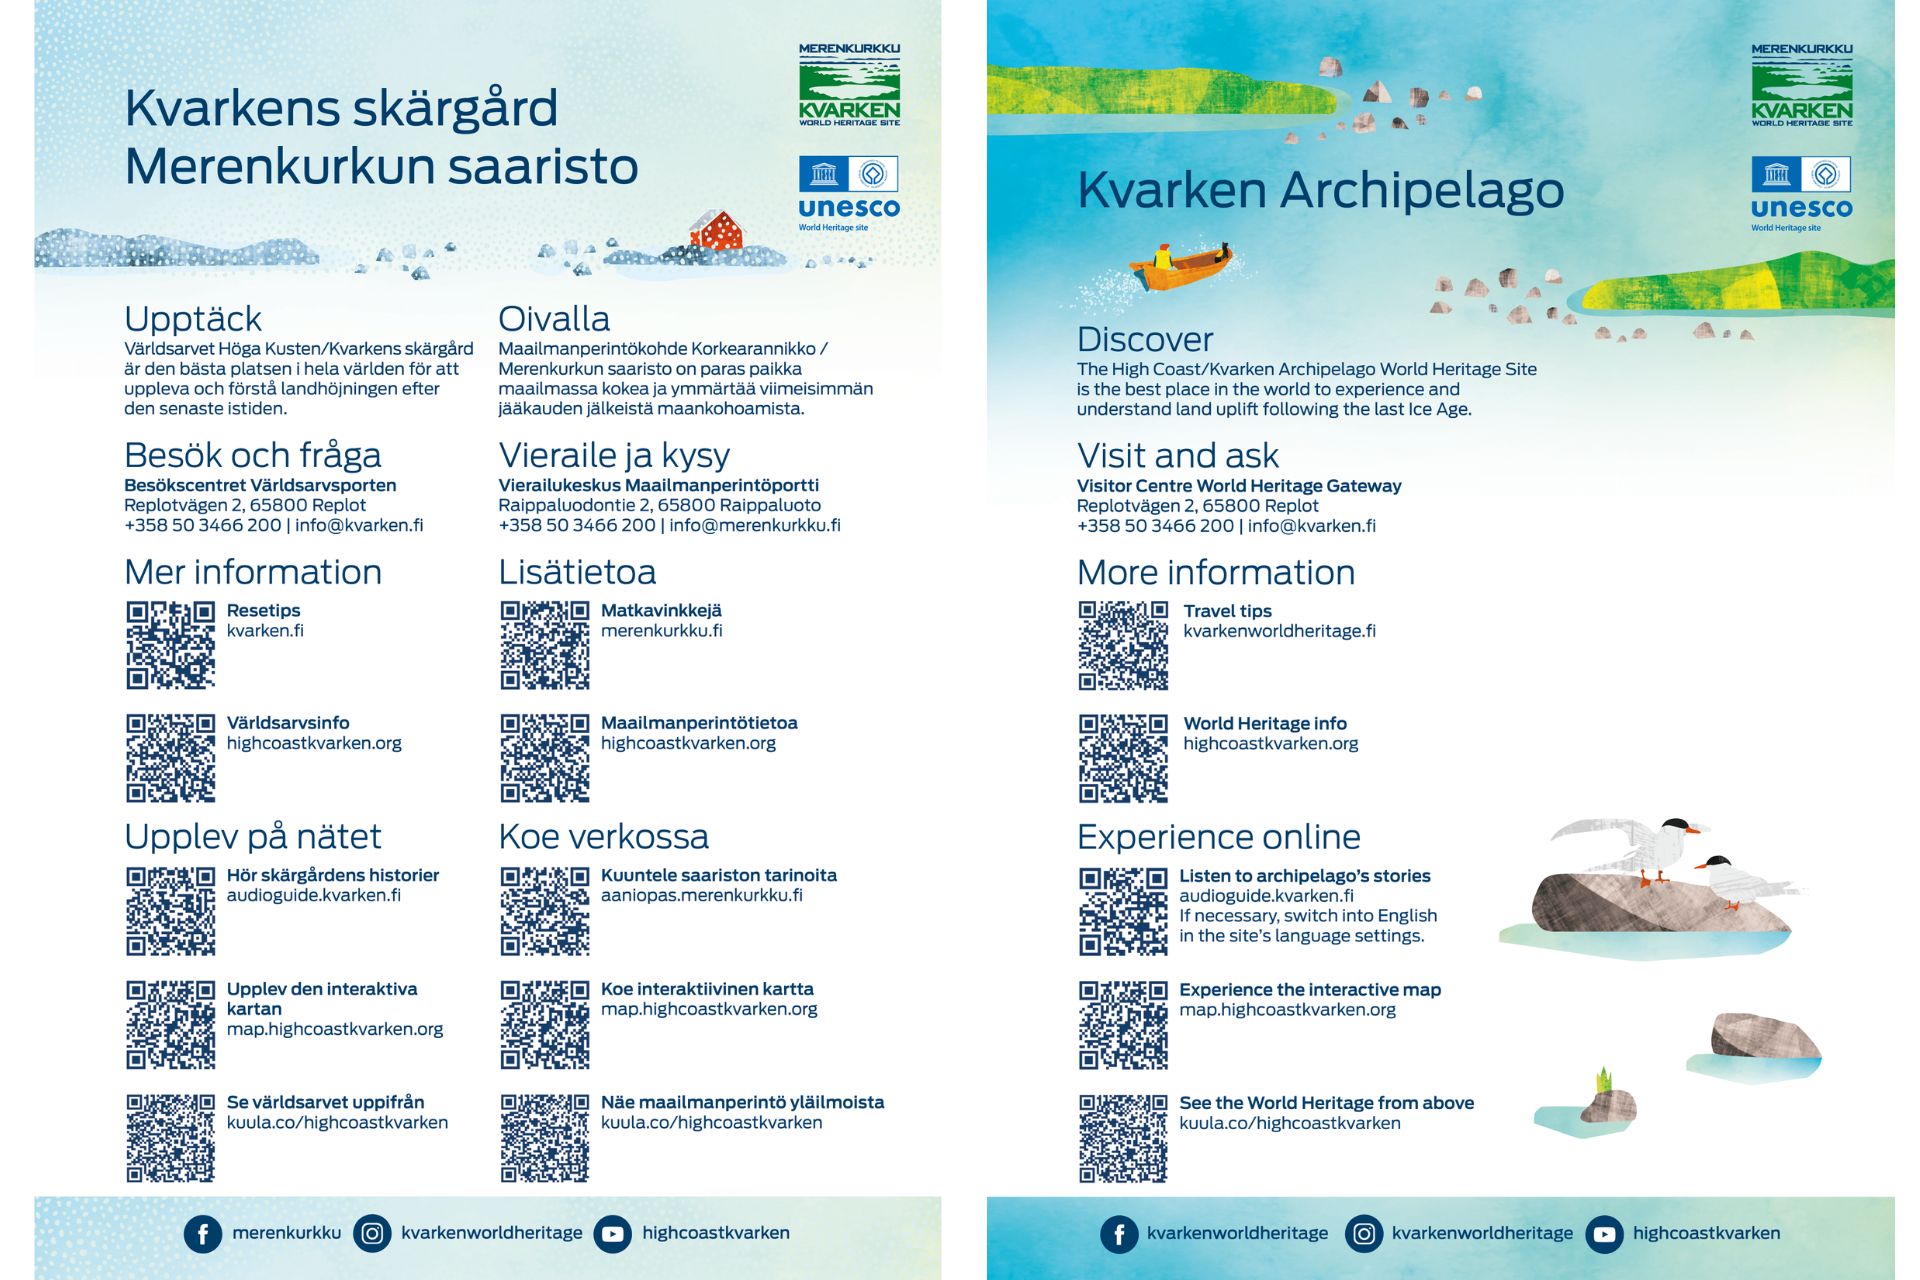 A photo of a Kvarken Archipelago flyer with QR codes and information about the World Heritage Site in Swedish, Finnish and English.